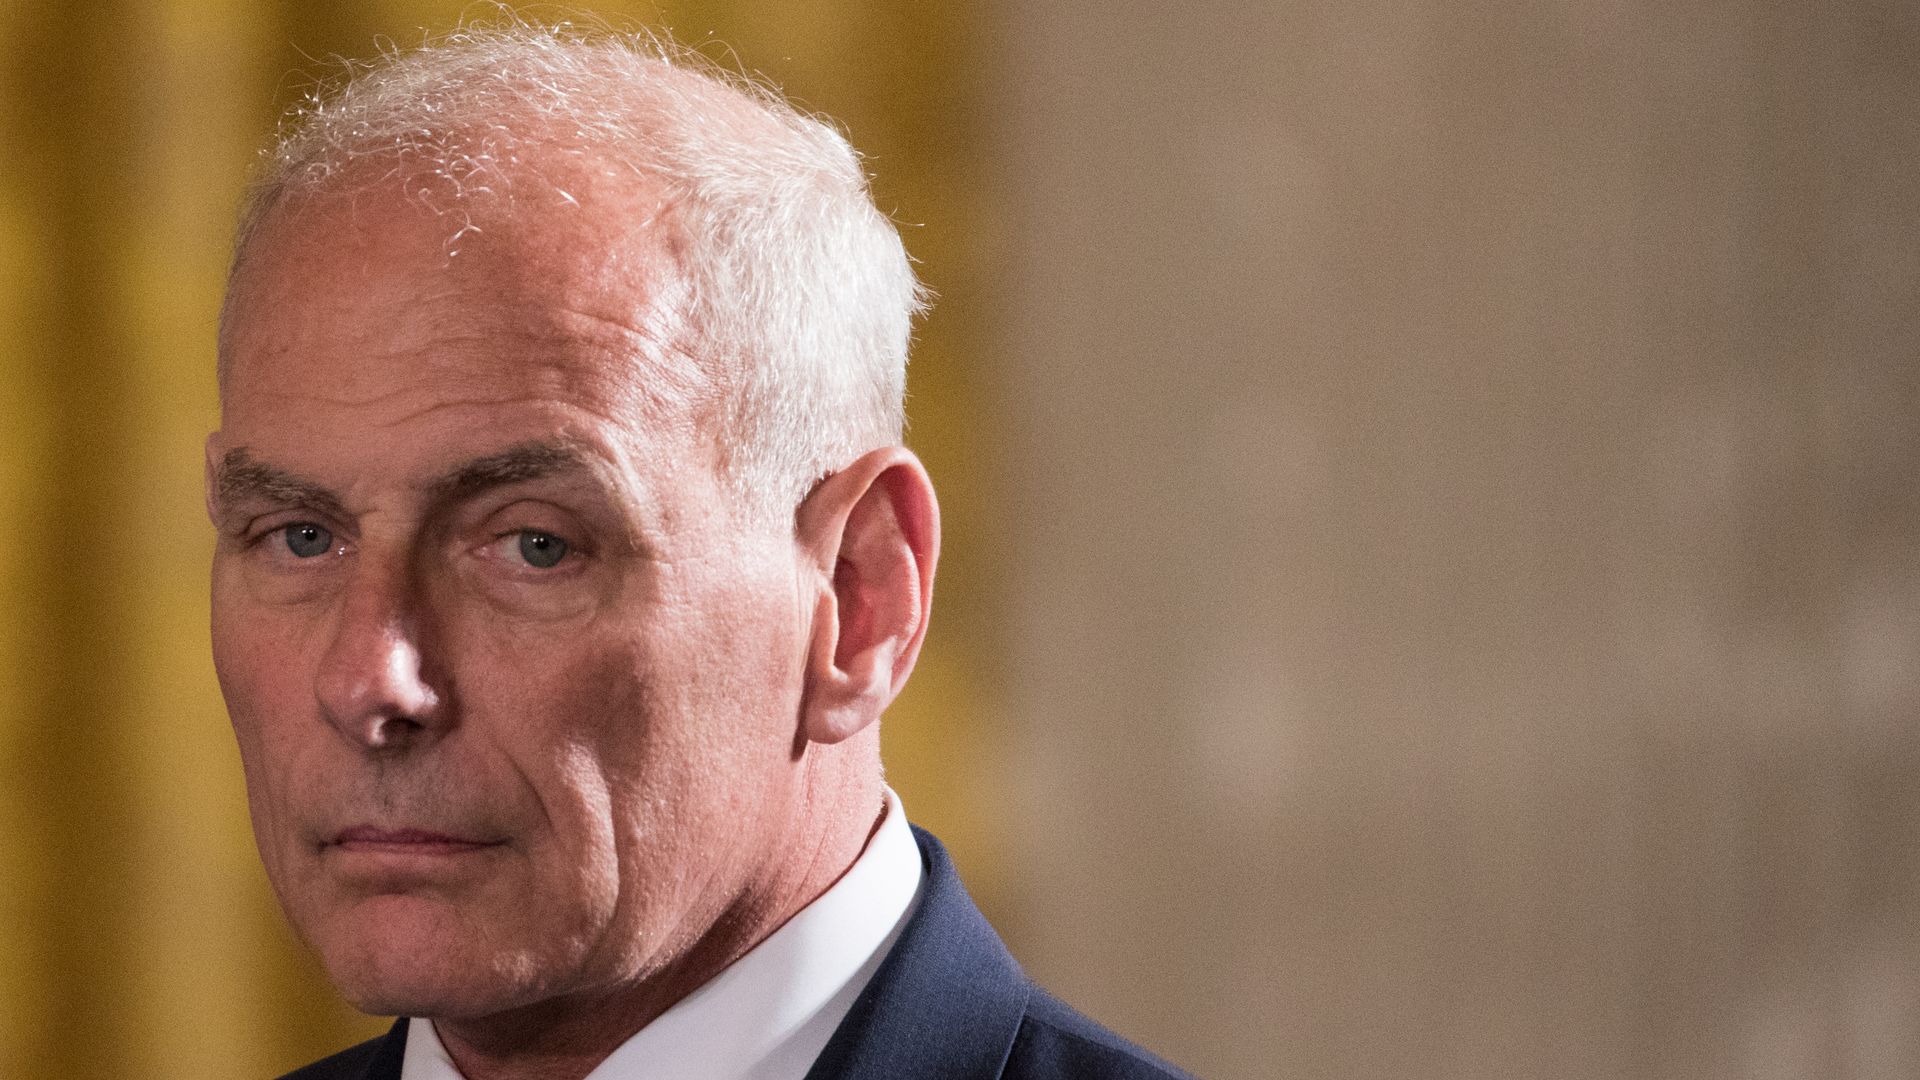 John Kelly in the White House in a suit